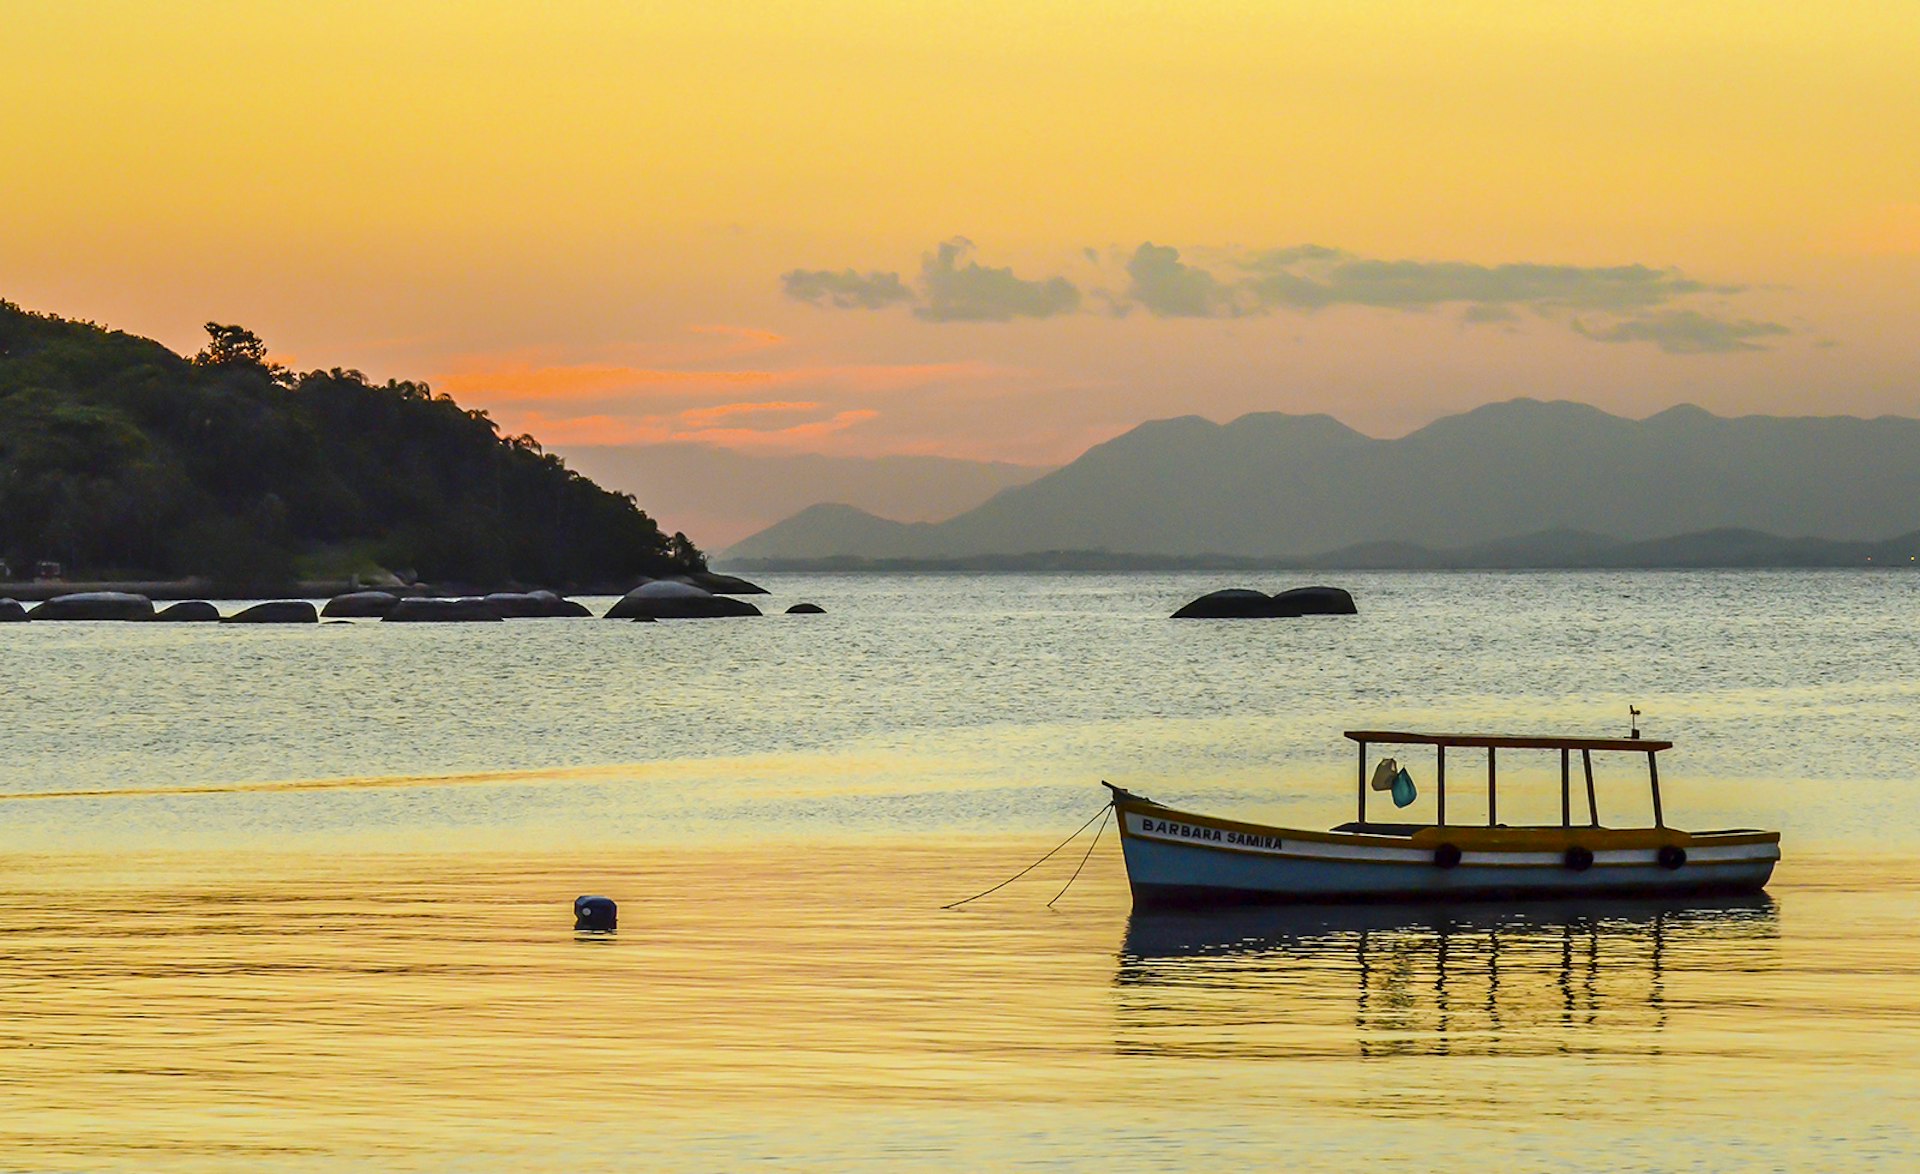 A small fishing boat is moored in glassy water that reflects the orange sky during sunset. Ilha da Paquetá, Brazil.